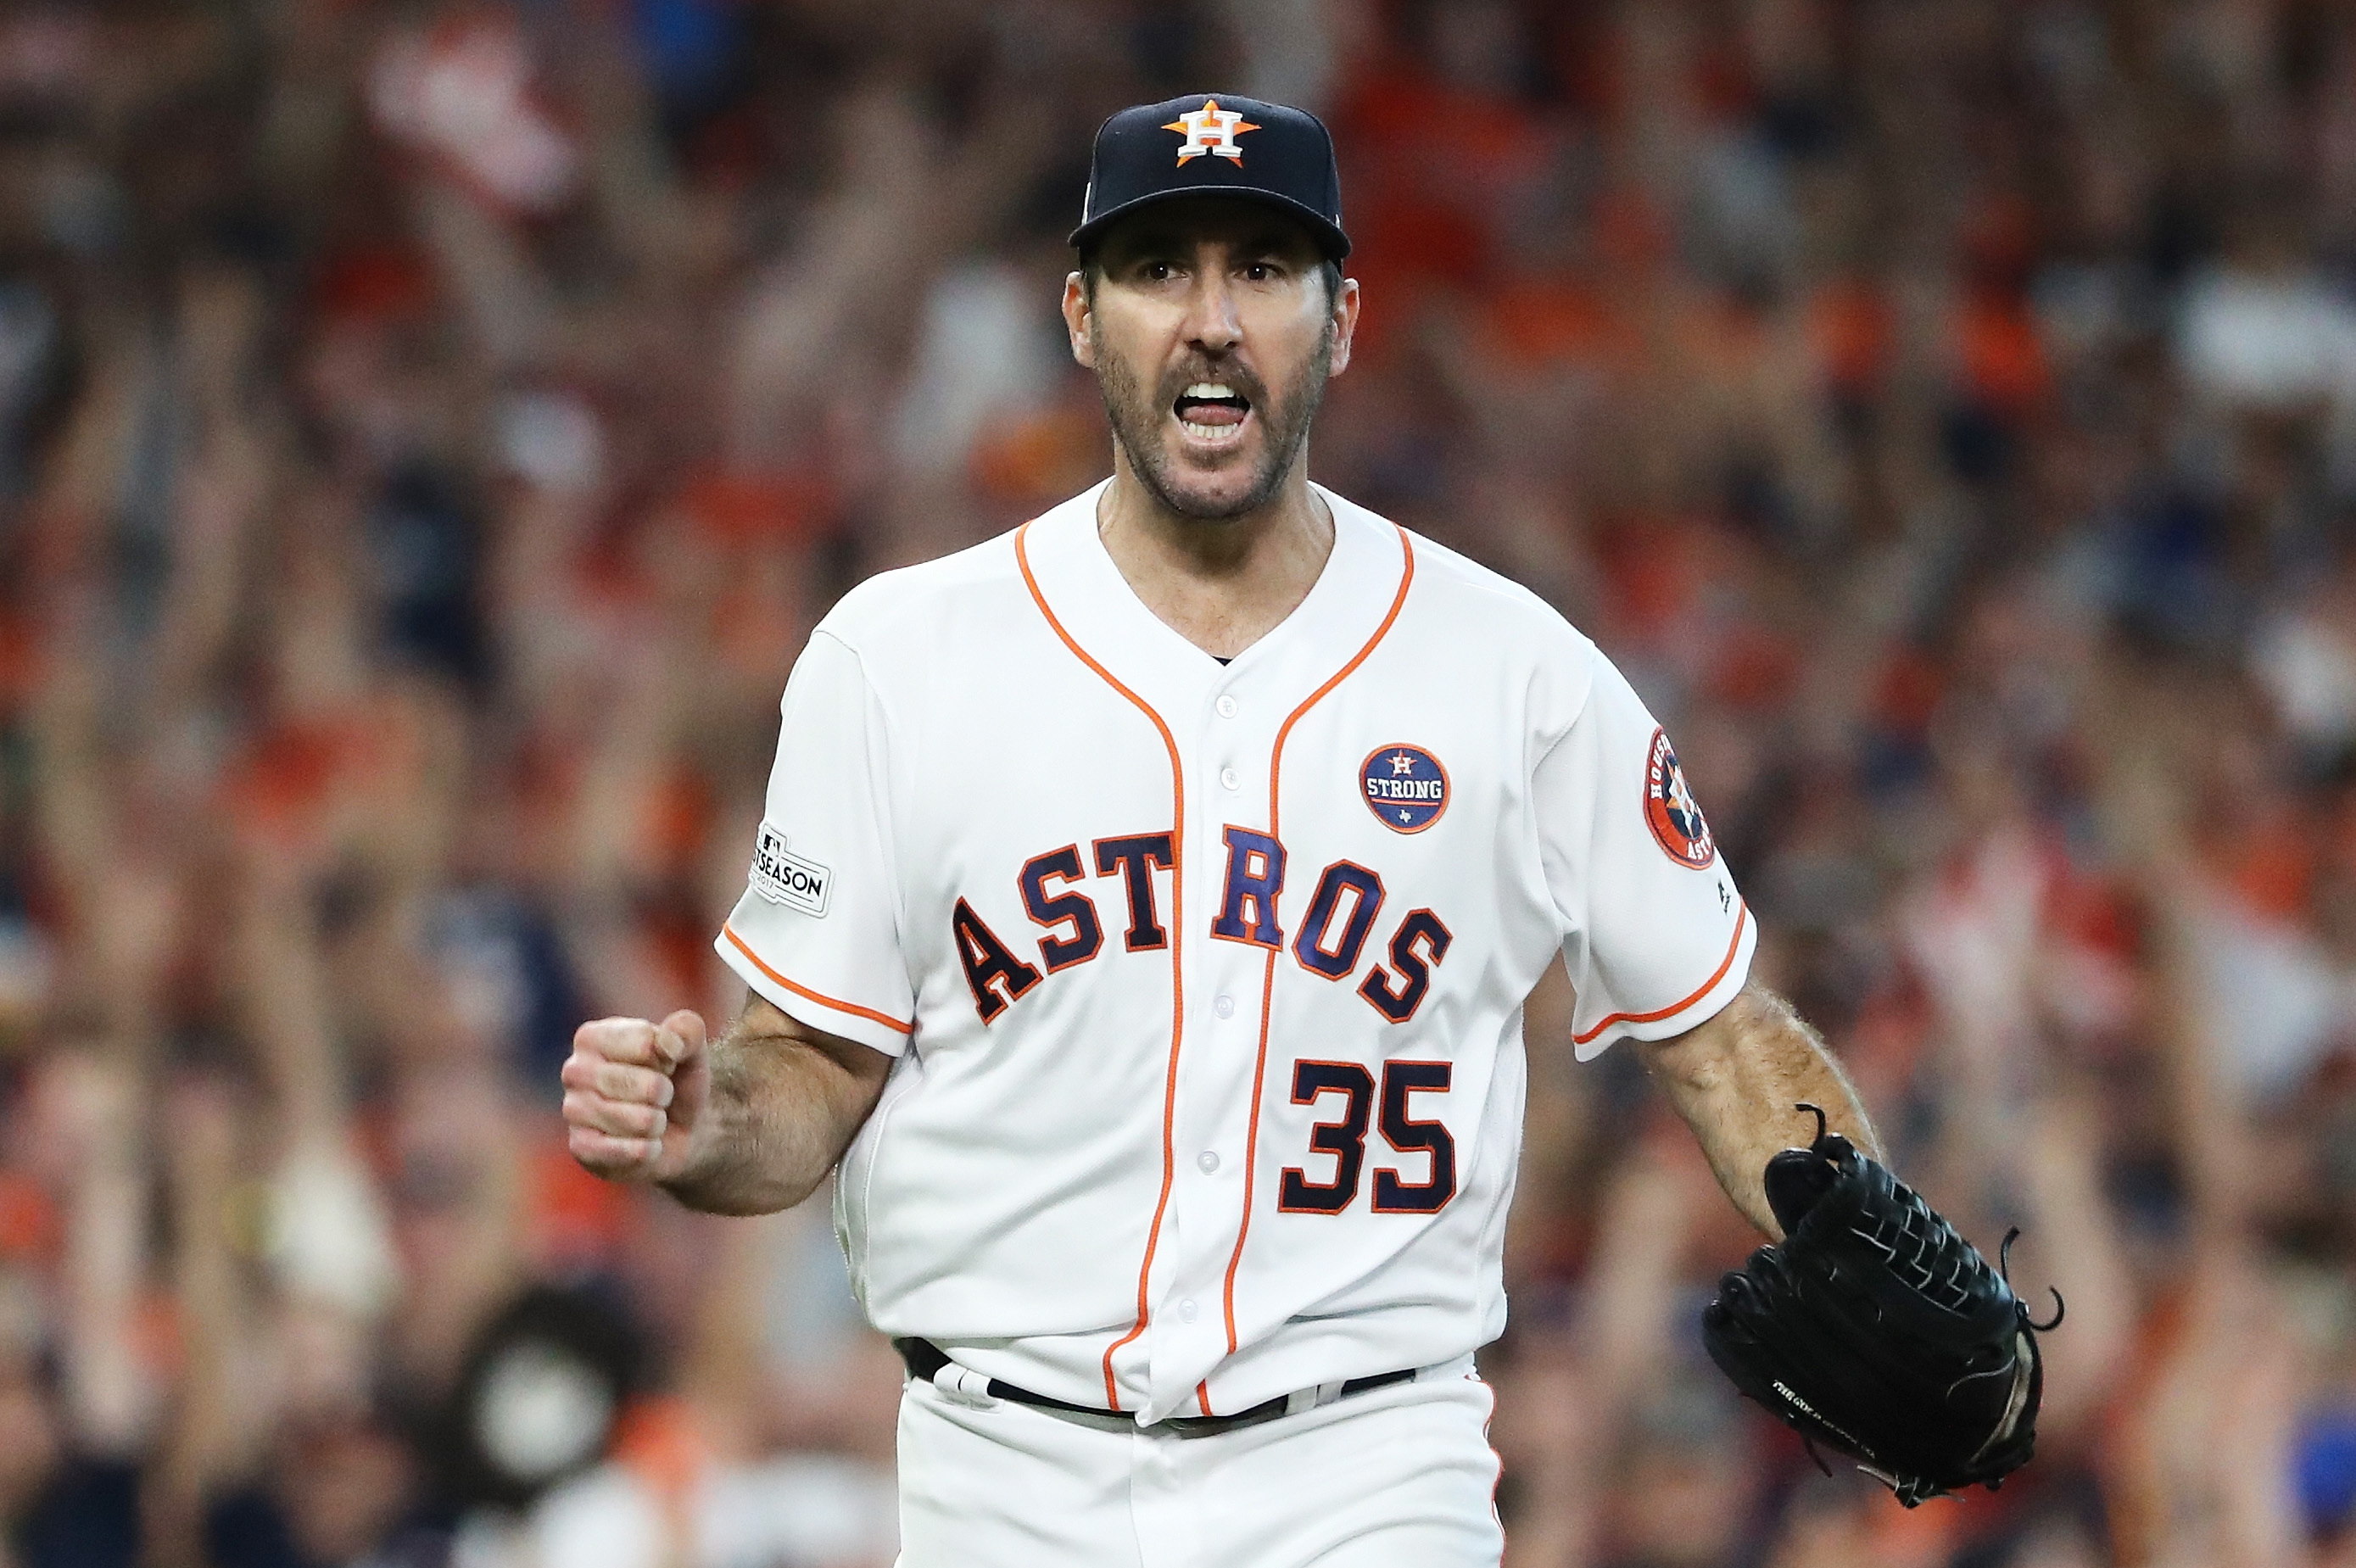 Watch Tigers' pitcher Justin Verlander collect his first career